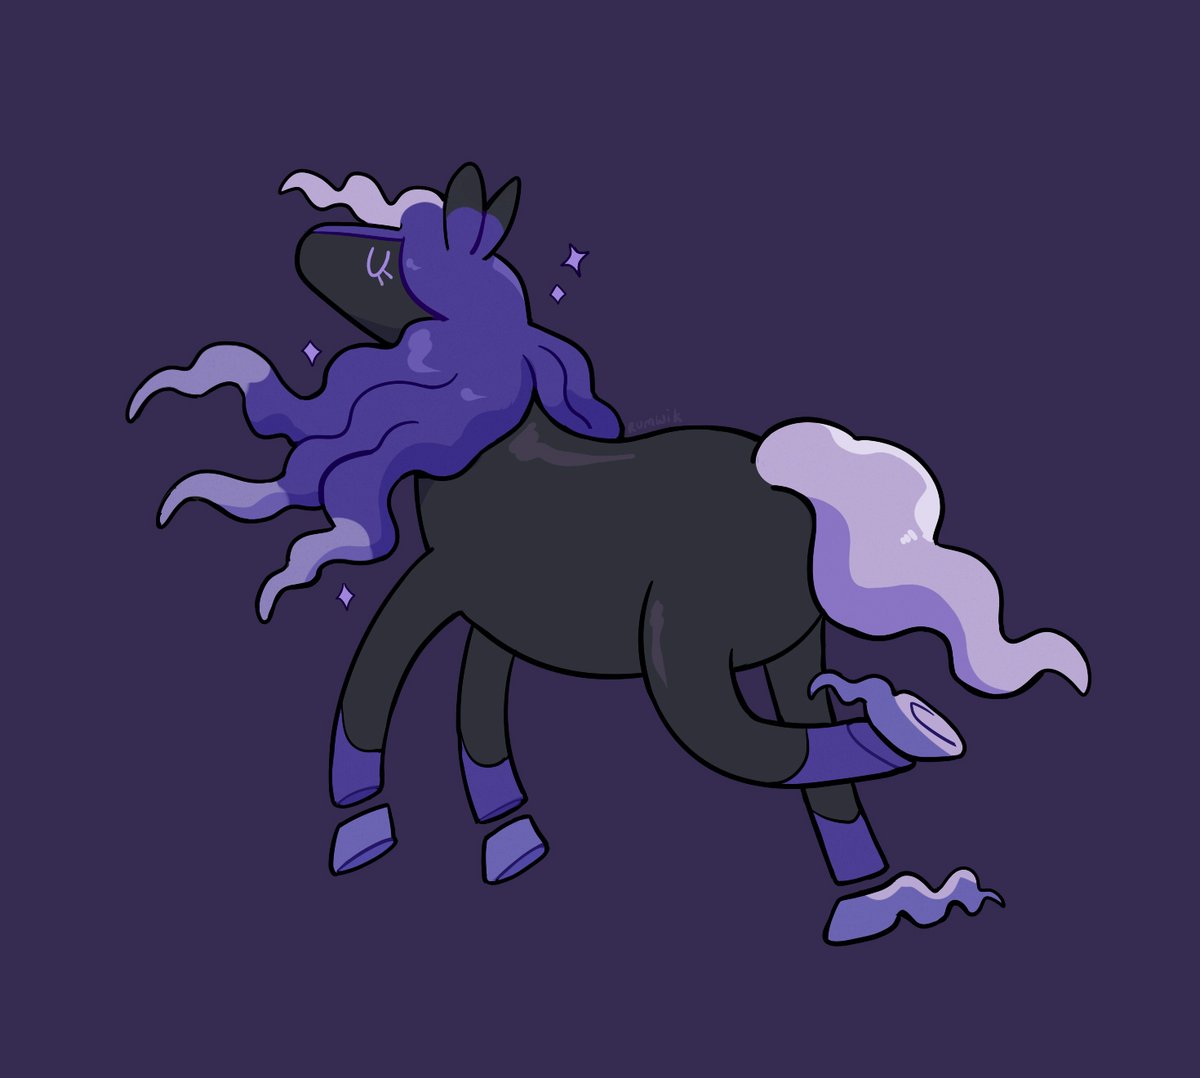 「A spectral steed is spooky indeed! 」|Happycrumble ⭐のイラスト